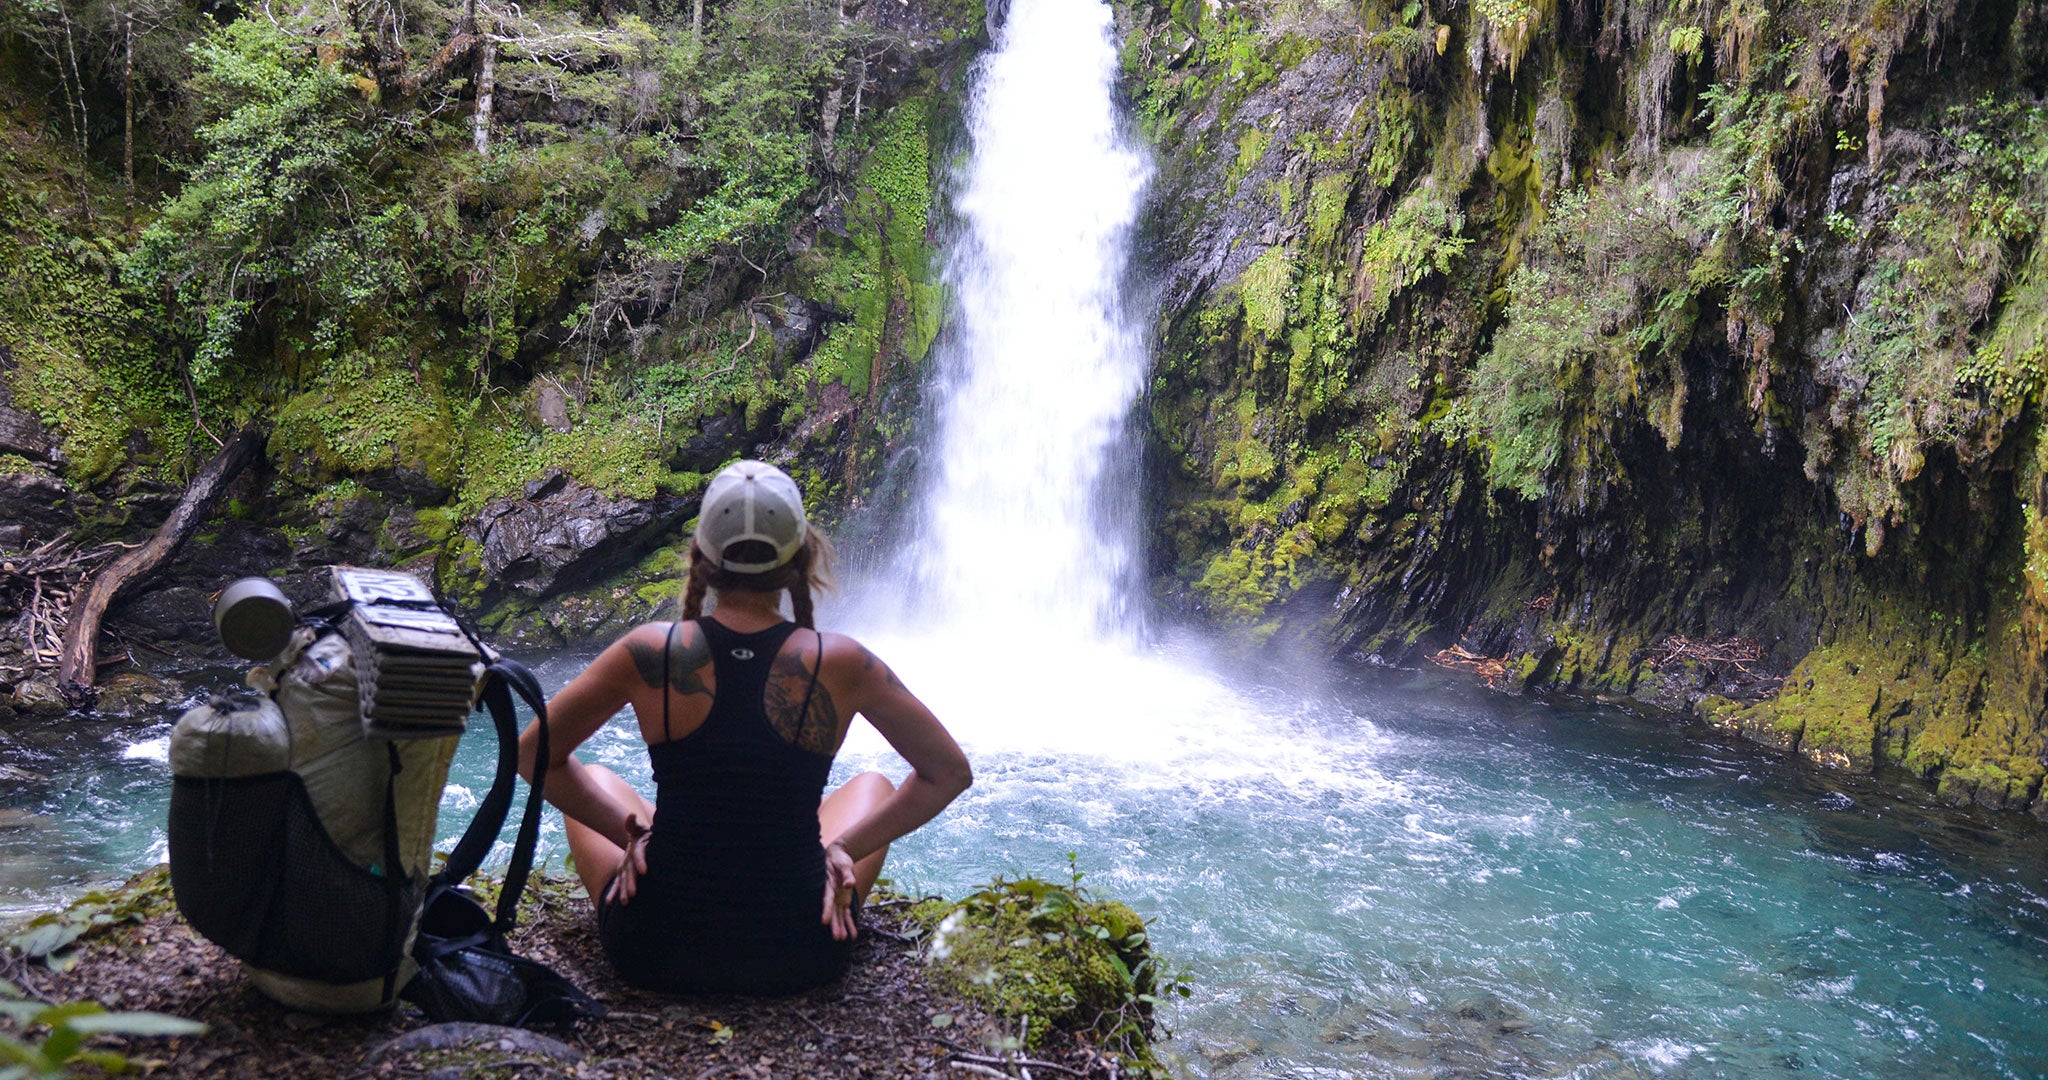 Ashley Hill sitting with ultralight backpack overlooking a waterfall